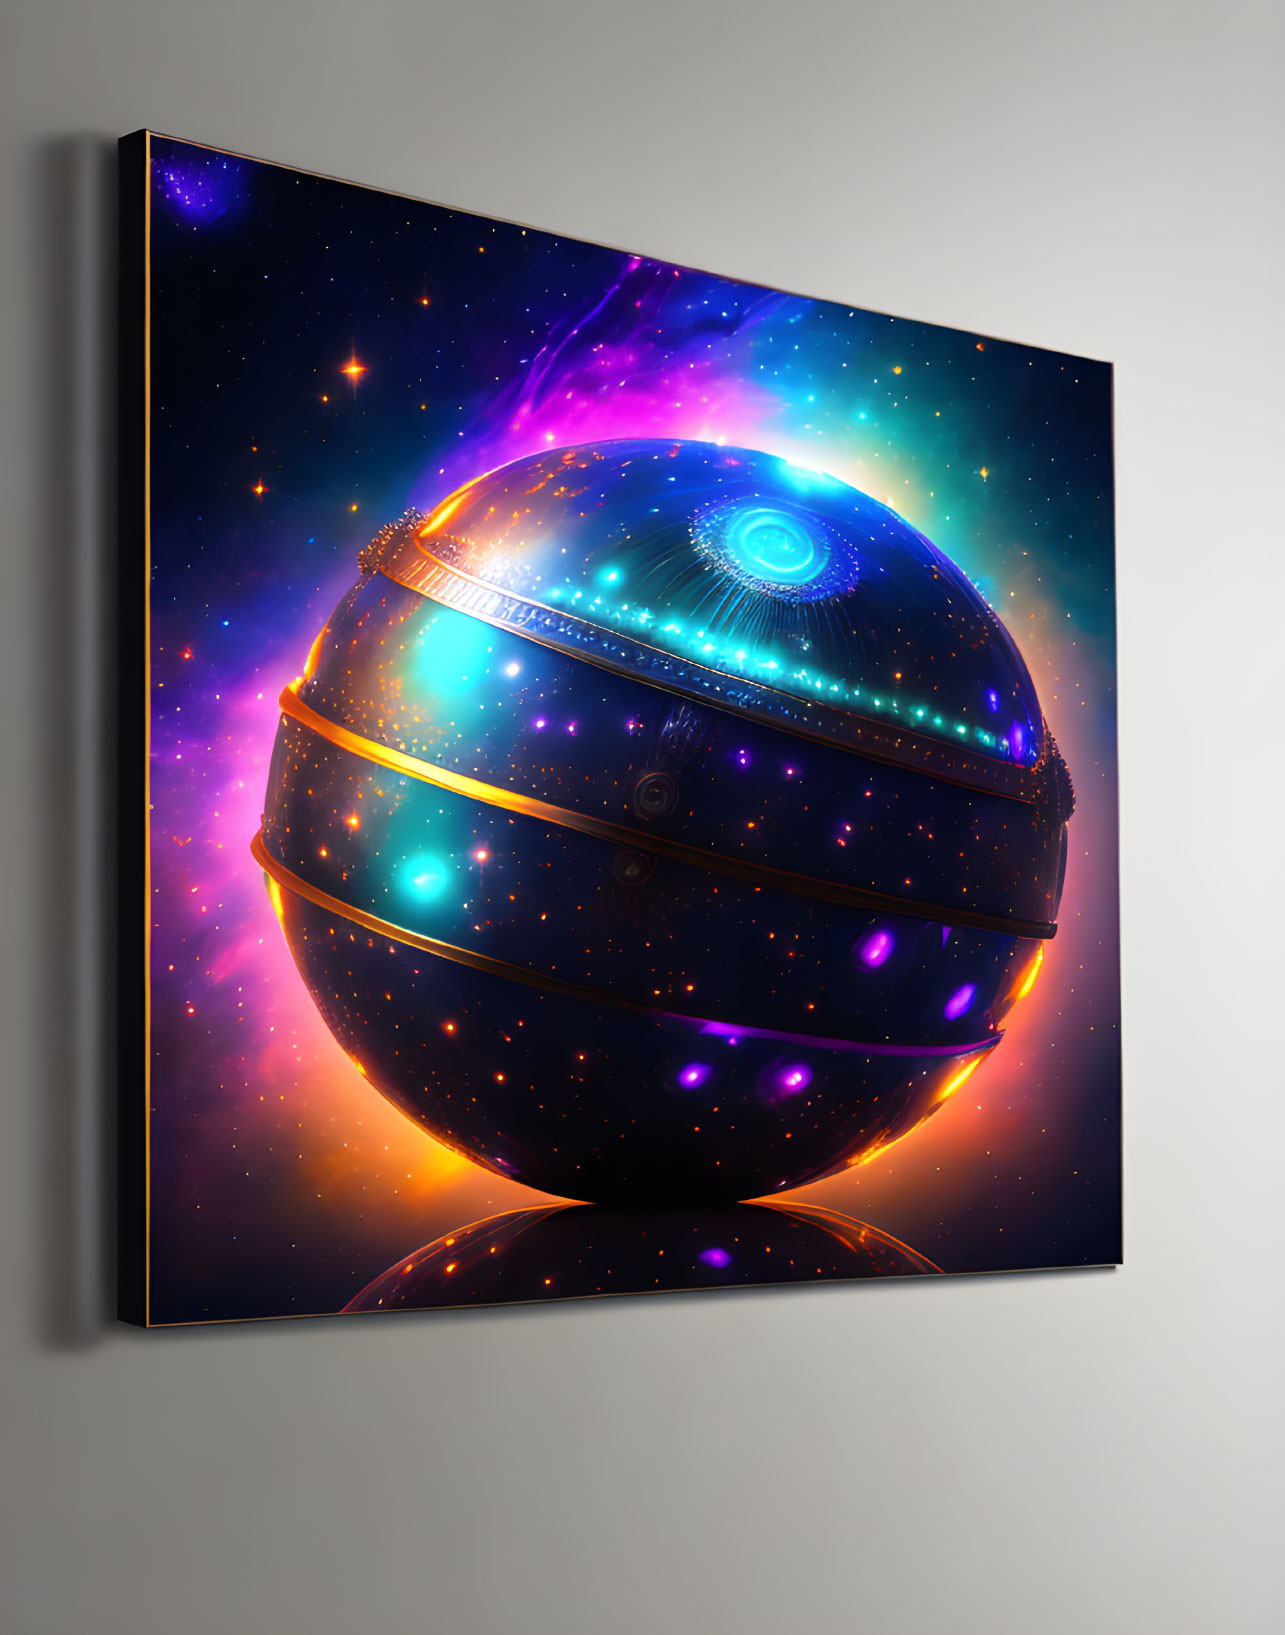 Futuristic glowing sphere canvas print with cosmic star patterns